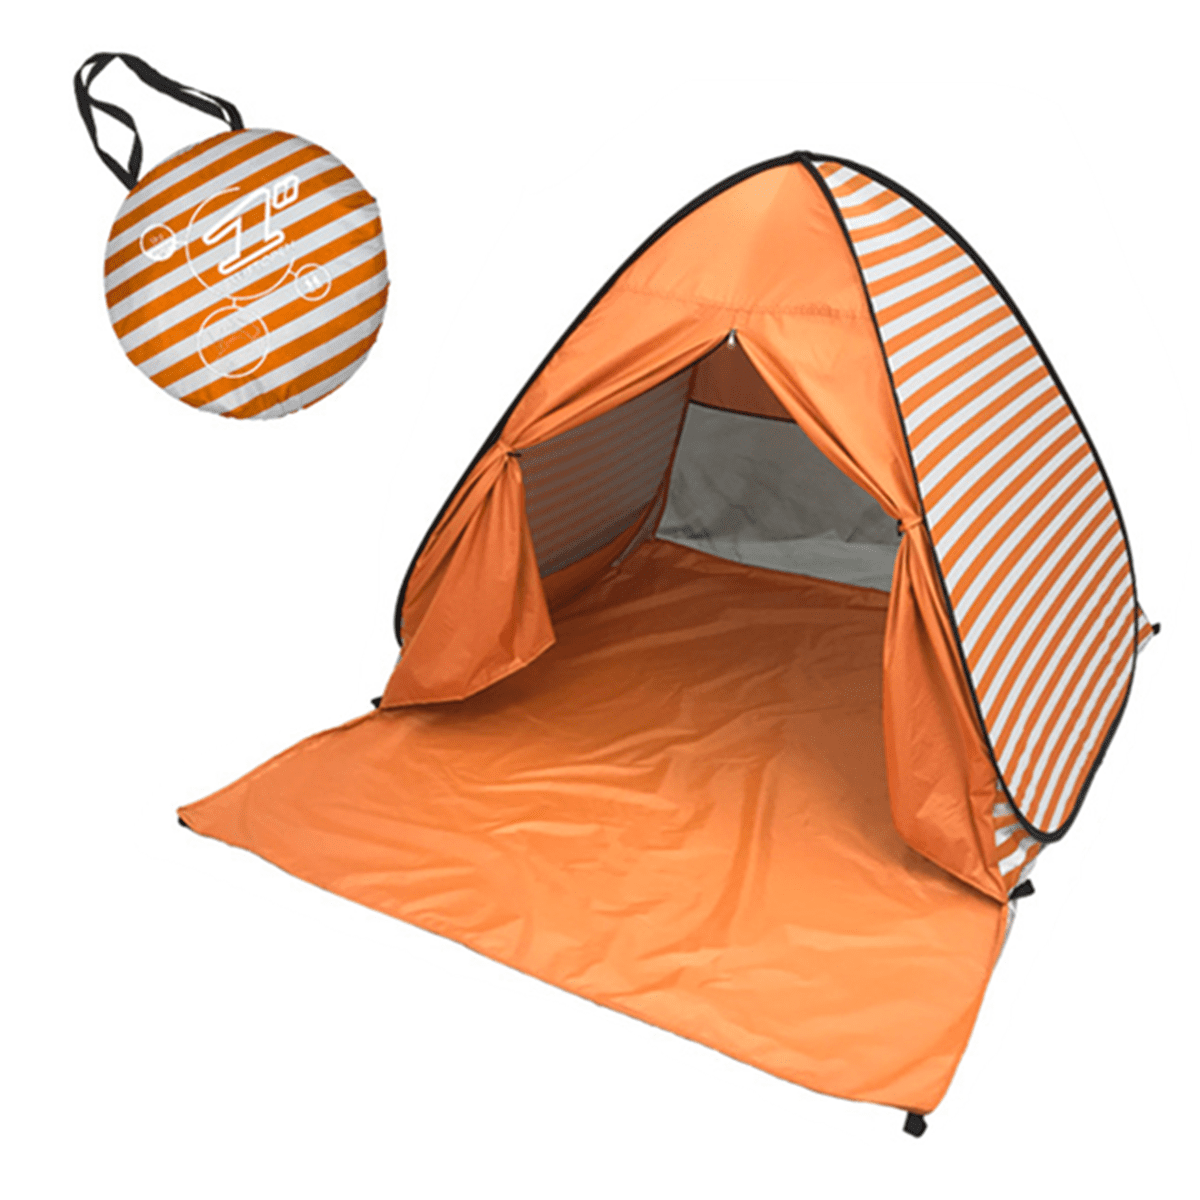 POHOVE Beach Tent Sun Shade Shelter Automatic Popup Beach Tent Windproof Beach Cabana with Ventilating Windows and Carrying Bag,Portable Sunshade Beach Umbrella for Camping Hiking Beach